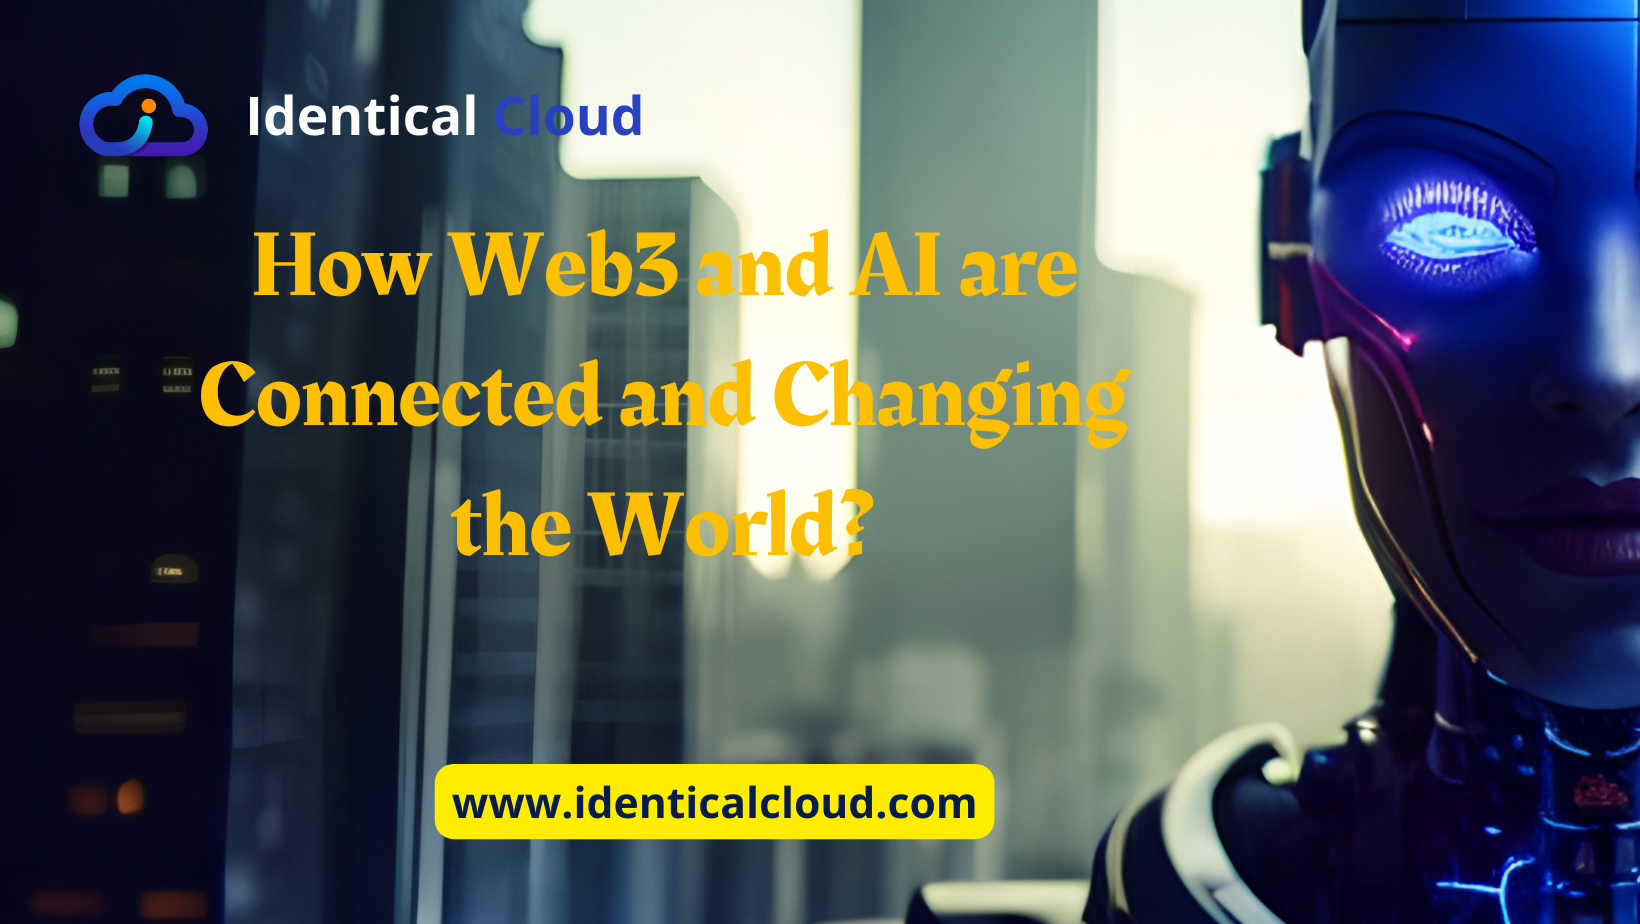 How Web3 and AI are Connected and Changing the World? - identicalcloud.com